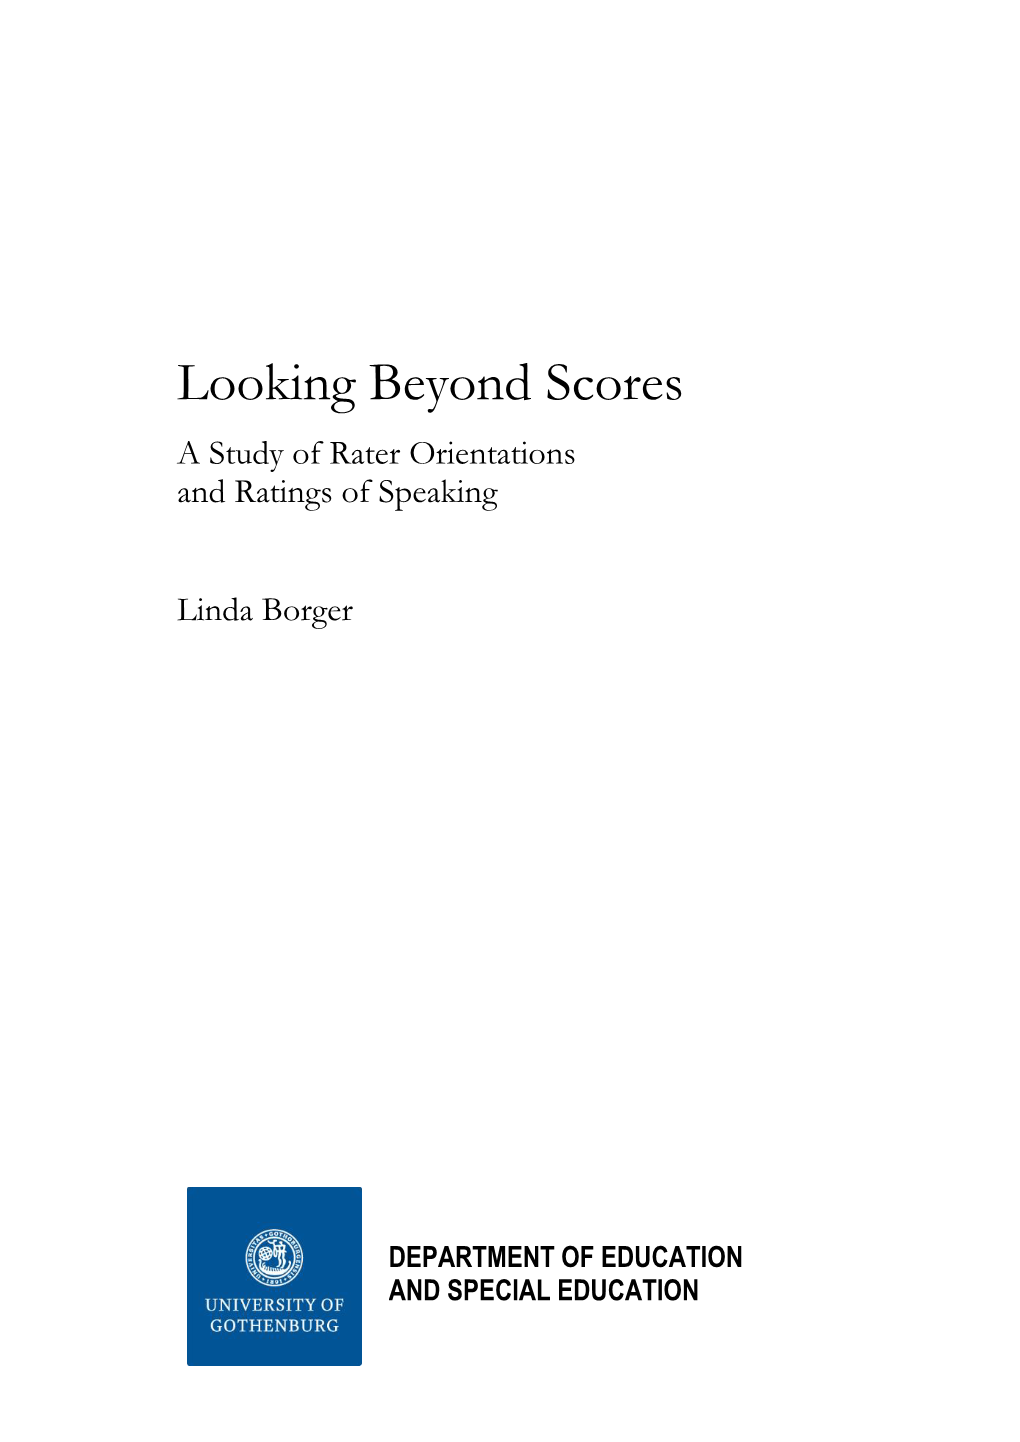 Looking Beyond Scores a Study of Rater Orientations and Ratings of Speaking